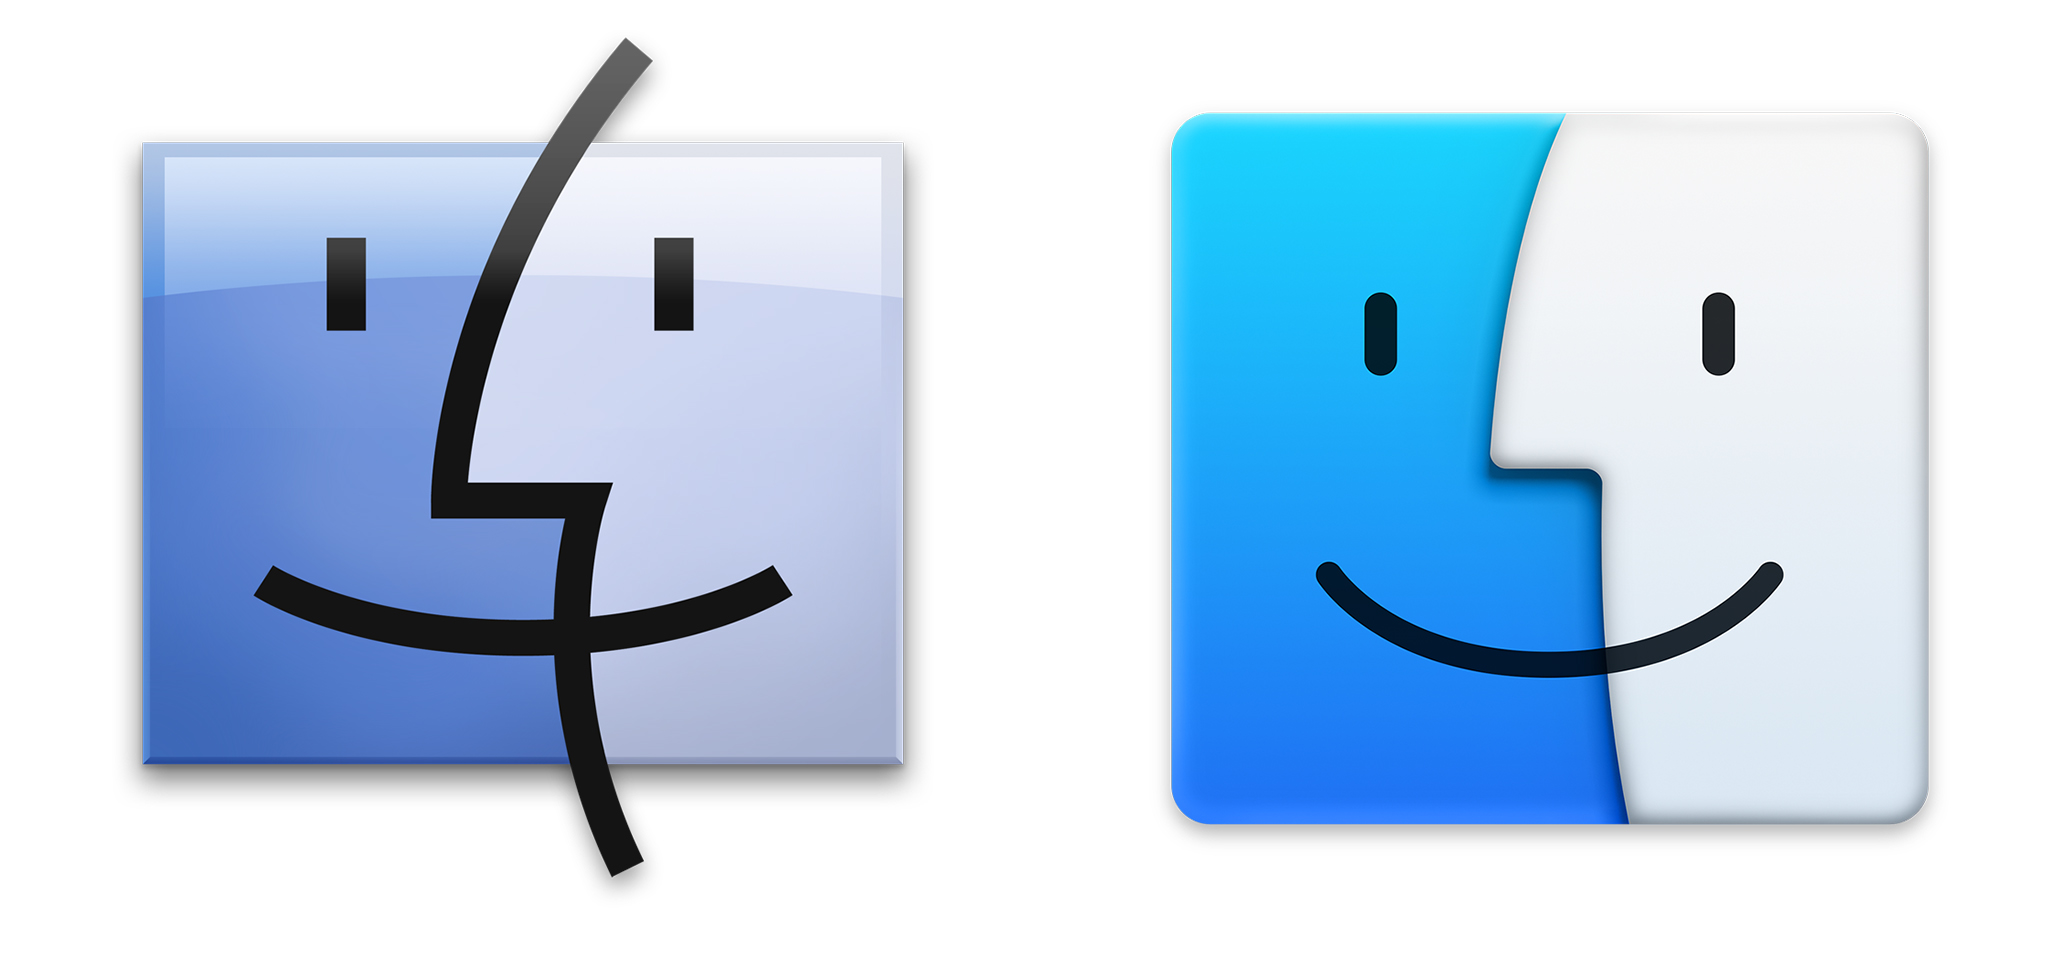 mac os x icons for image aliases